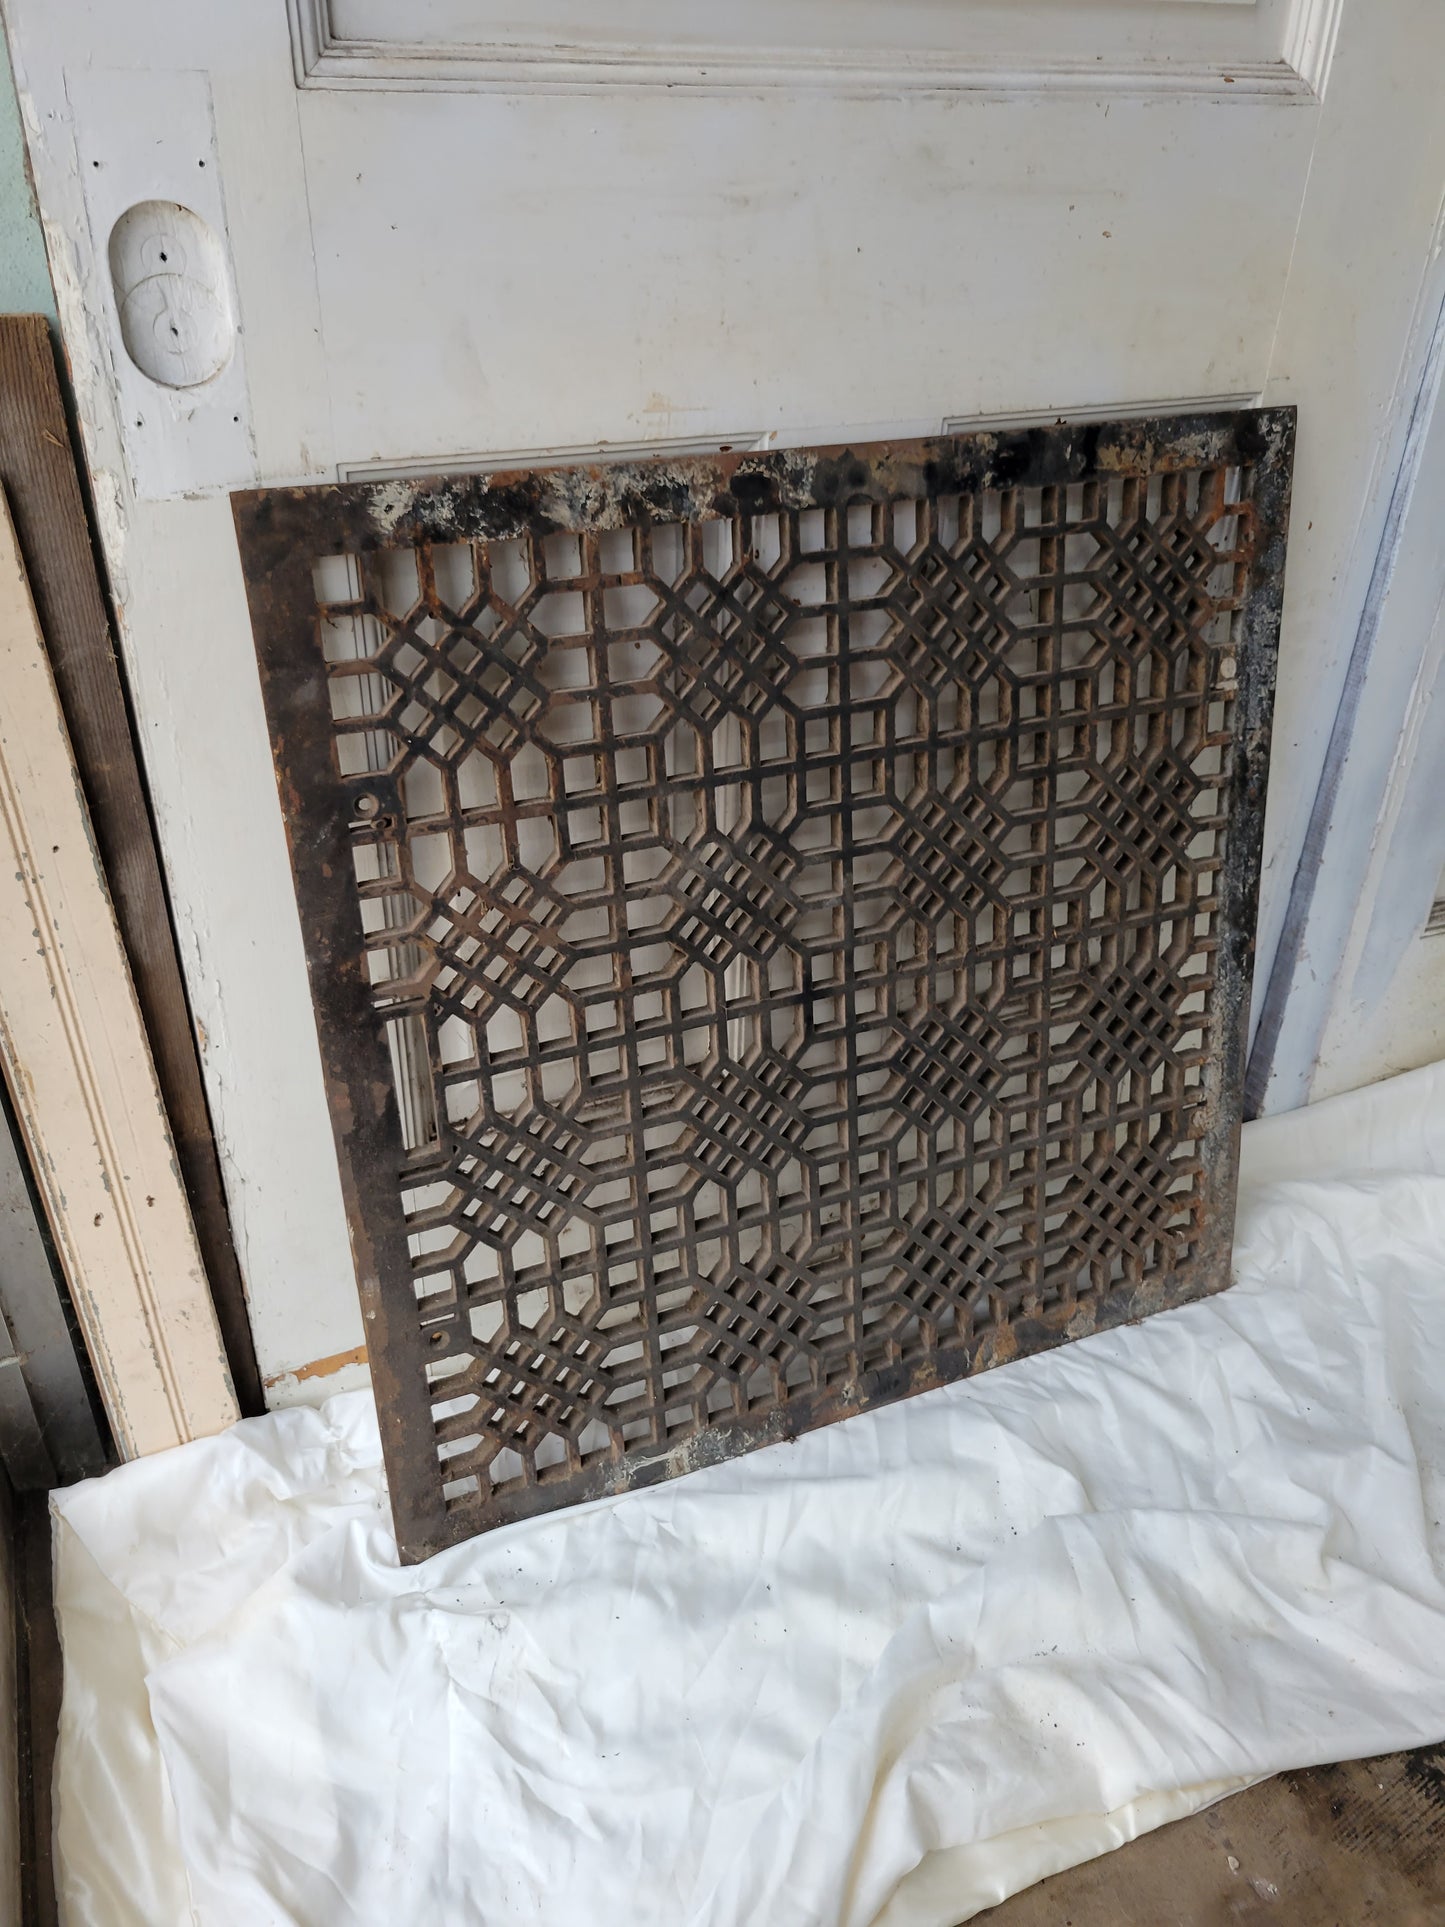 29" Square Extra Large Victorian Floor Grate, Large Iron Floor Vent Grate #070809